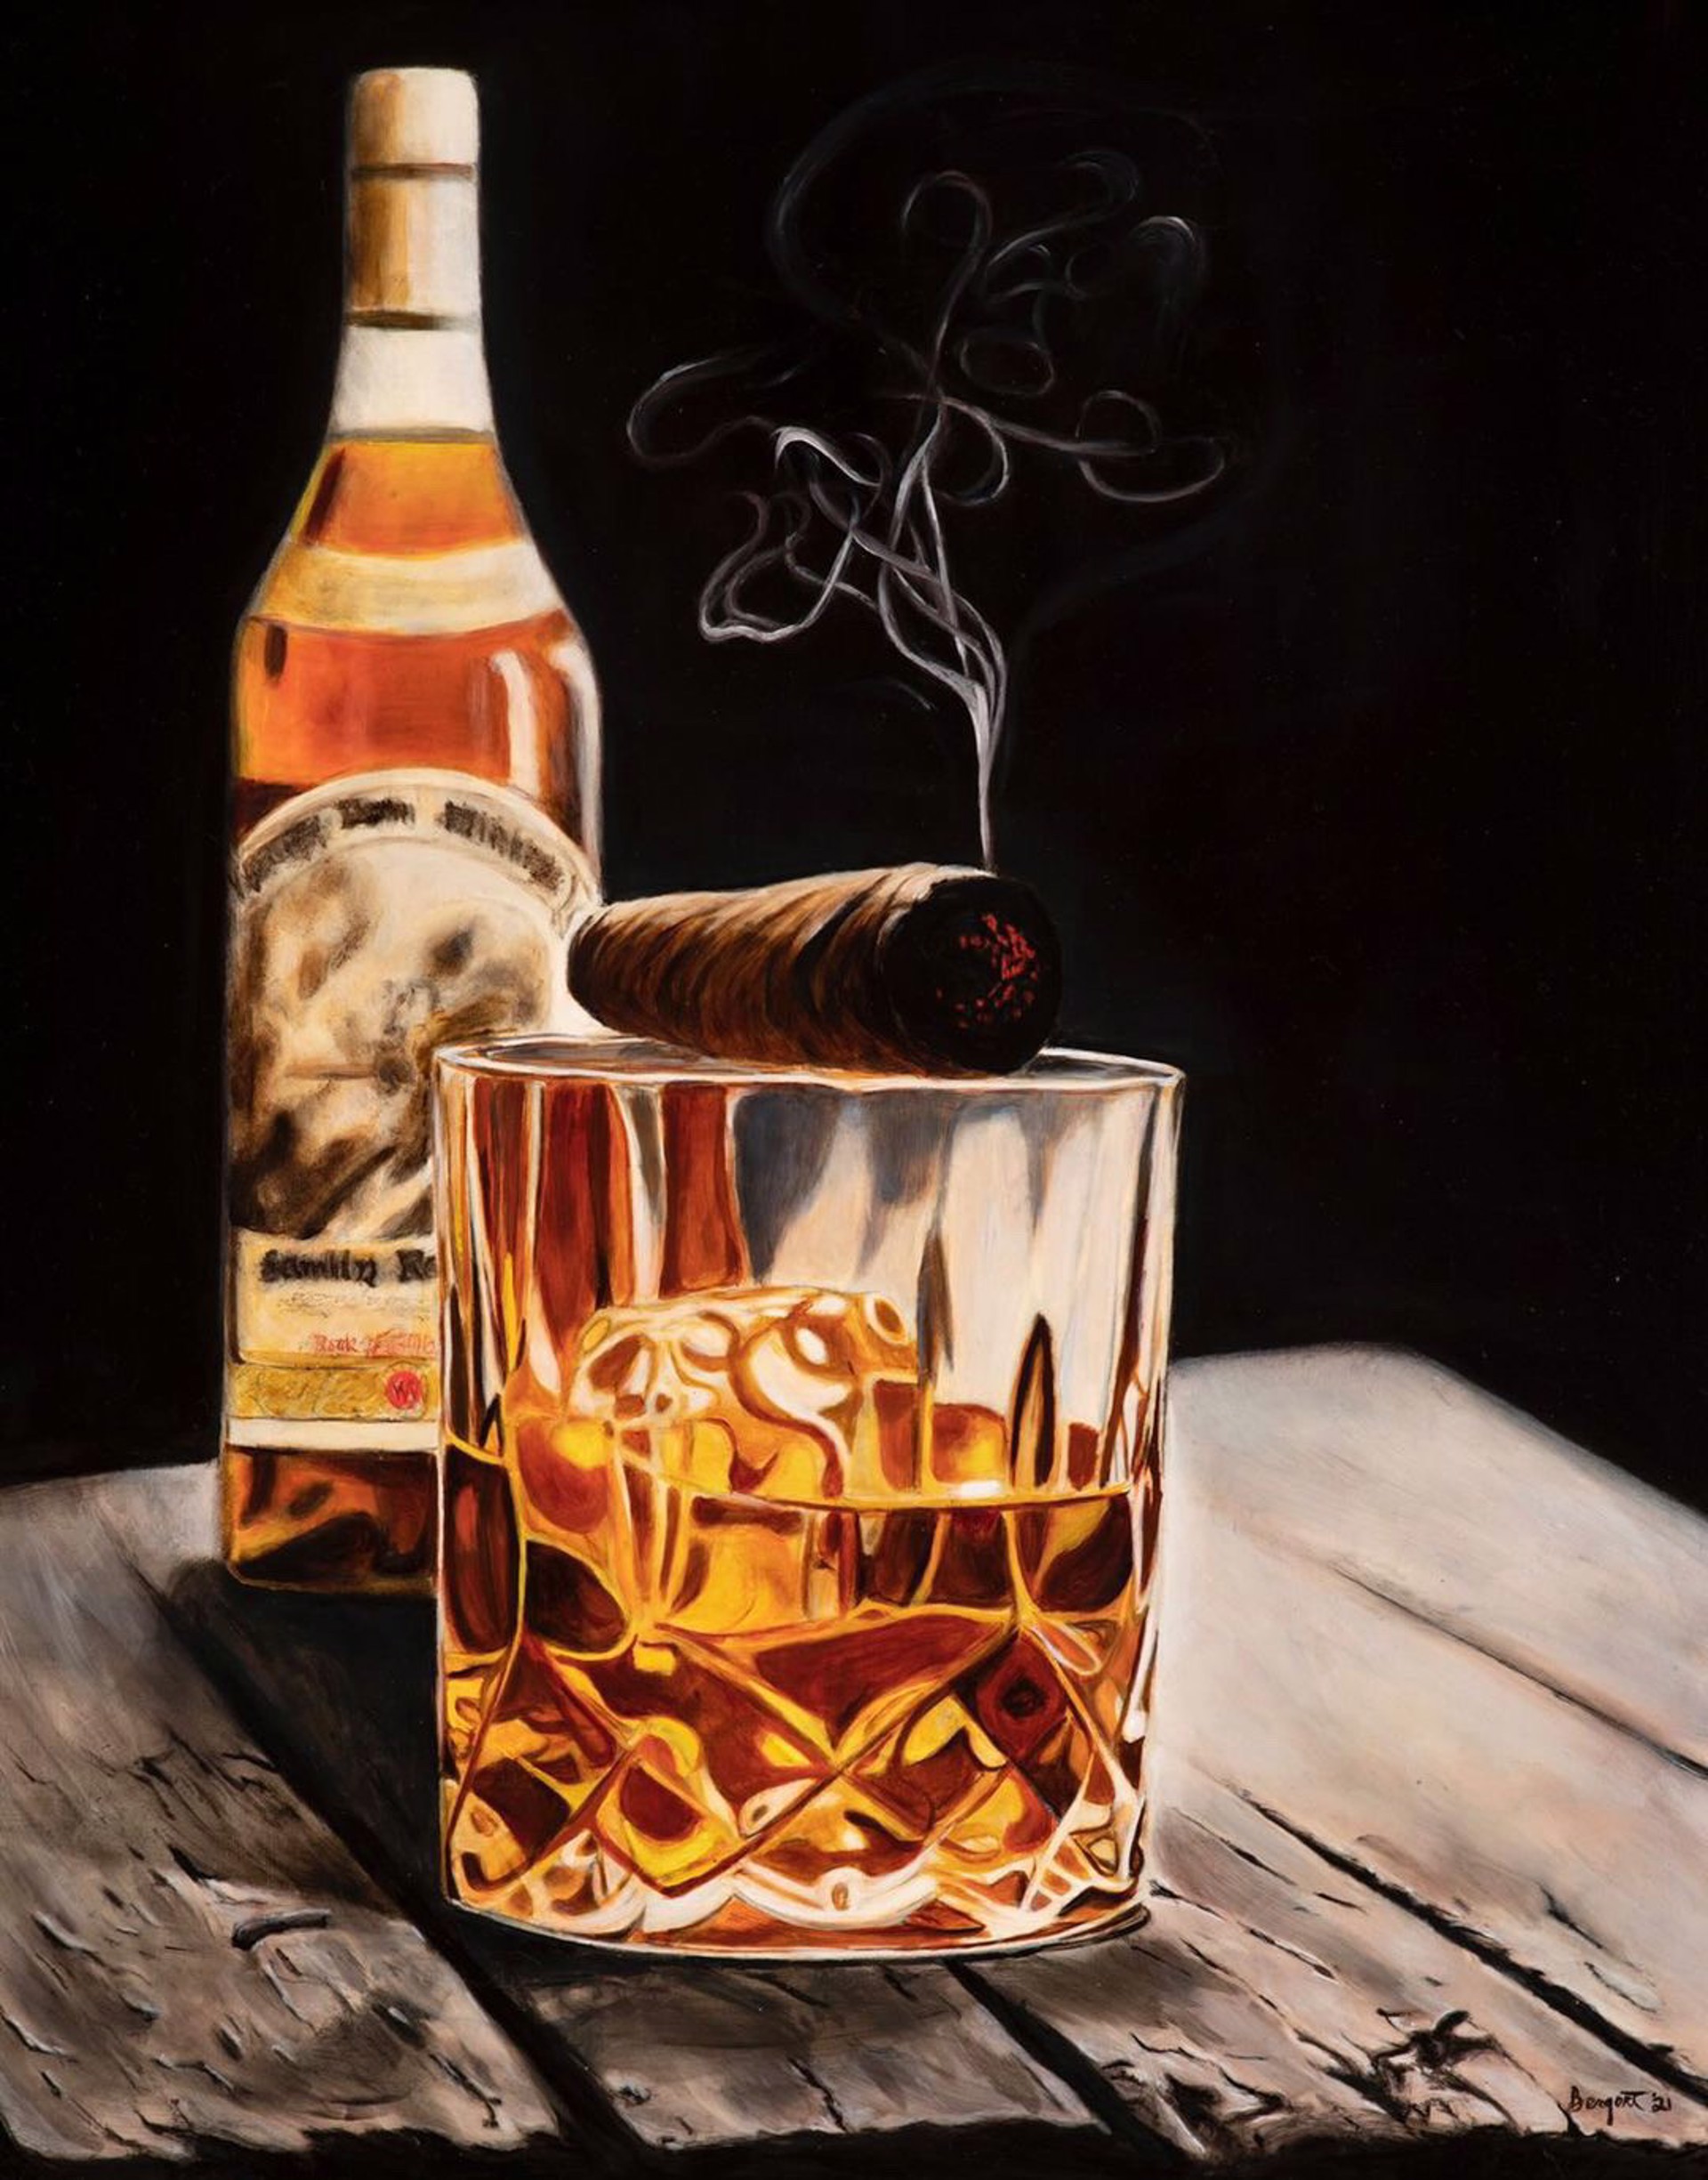 Pappy and Cigar by Todd Bergert